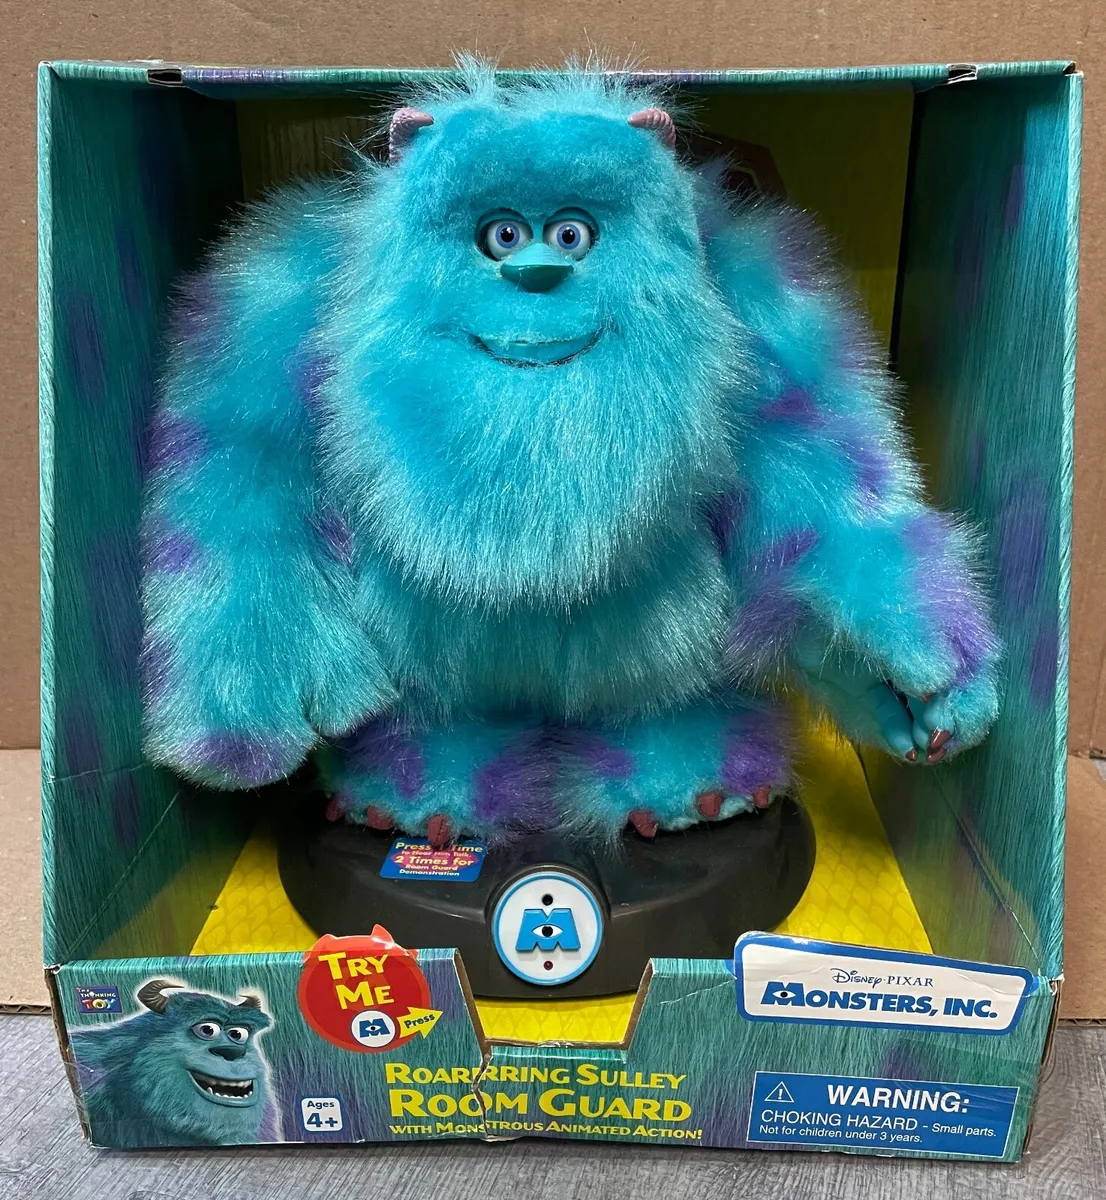 NRFB Monsters Inc. Roaring Sulley Room Guard. Original Toy 